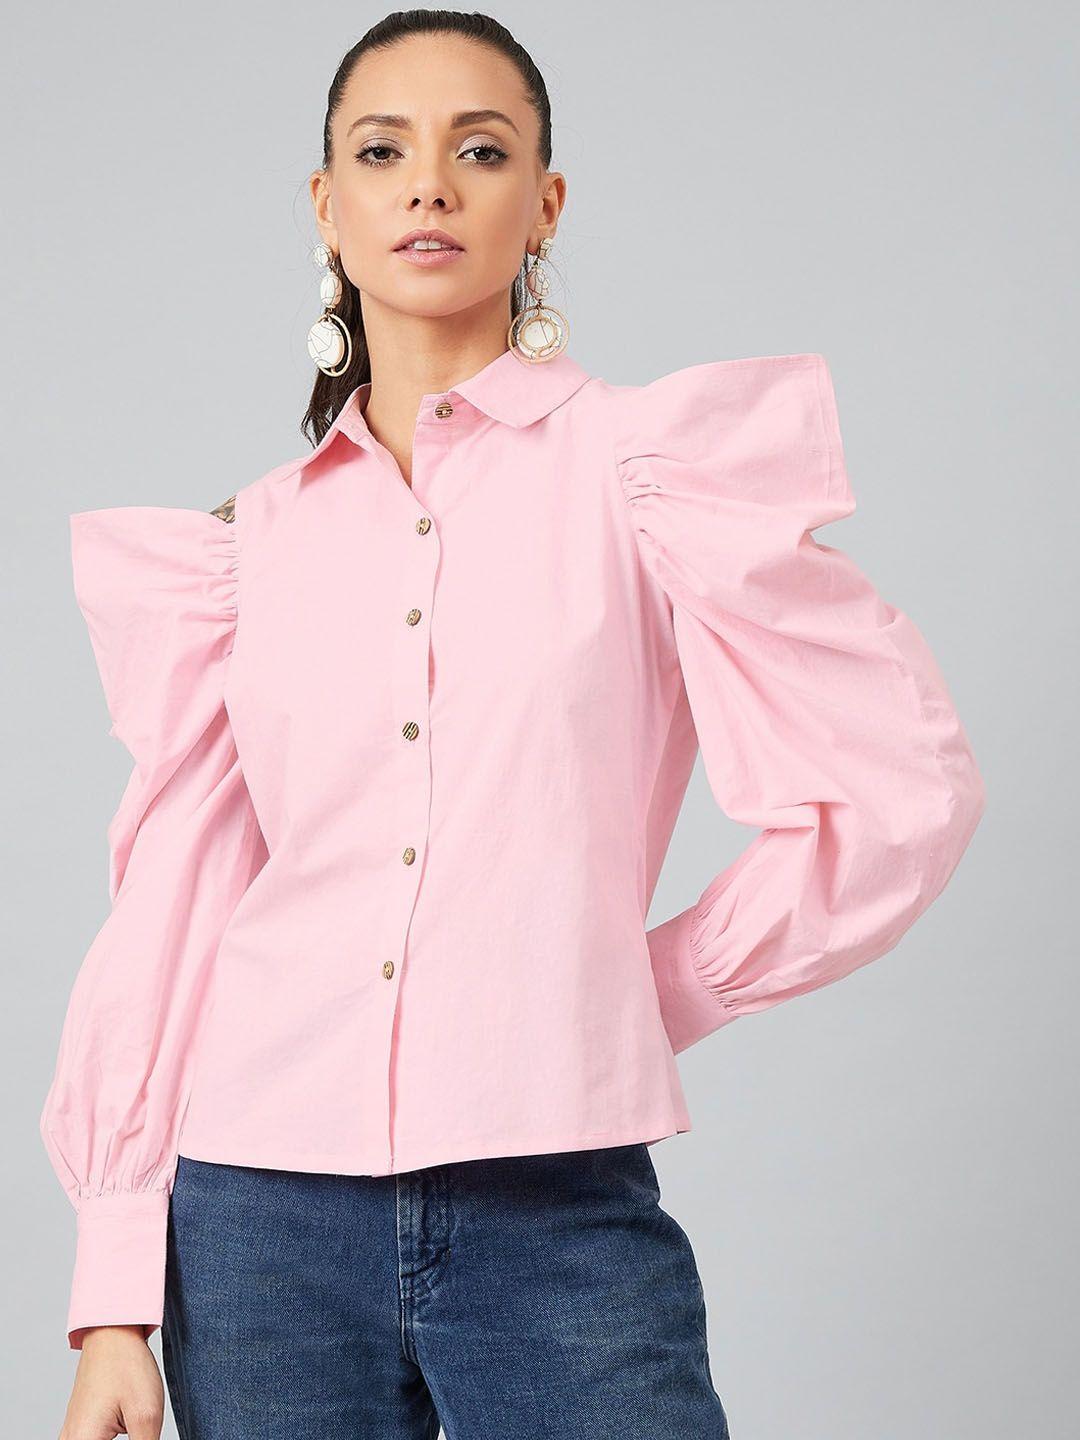 athena-women-pink-solid-shirt-style-top